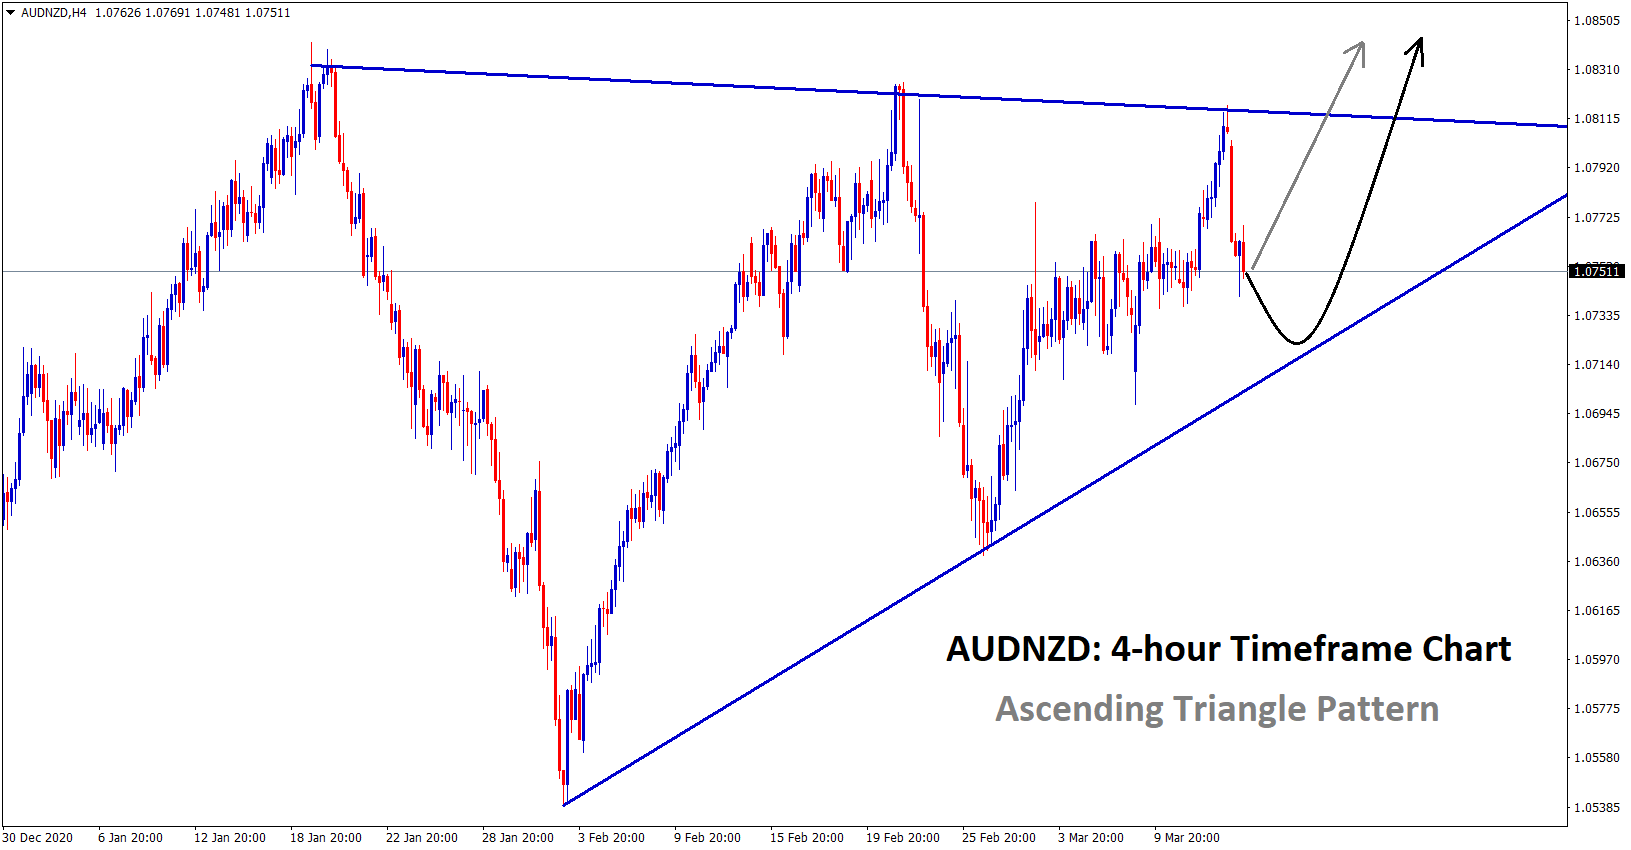 Ascending Triangle pattern in the AUDNZD